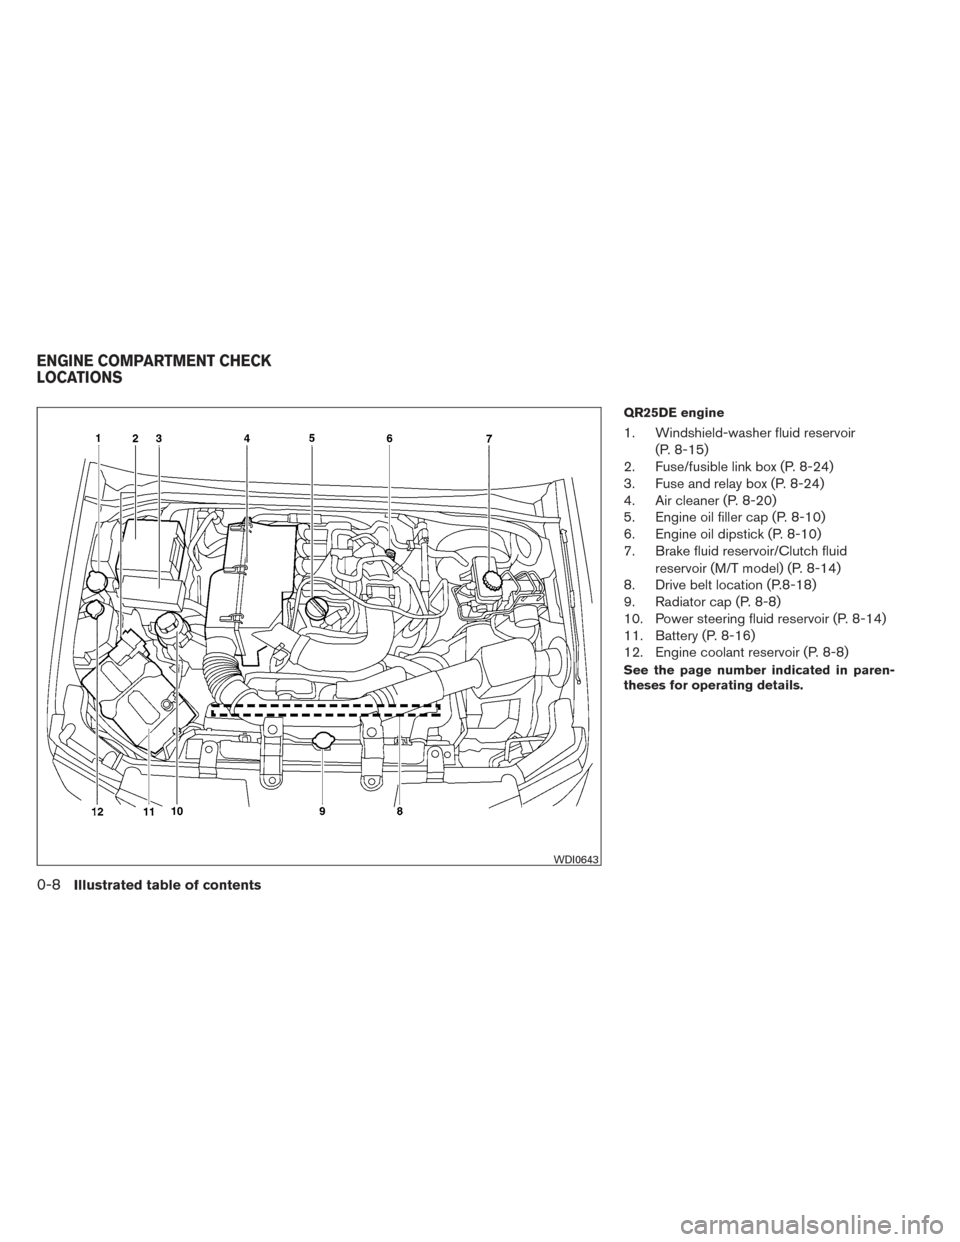 NISSAN FRONTIER 2014 D23 / 3.G Owners Manual QR25DE engine
1. Windshield-washer fluid reservoir(P. 8-15)
2. Fuse/fusible link box (P. 8-24)
3. Fuse and relay box (P. 8-24)
4. Air cleaner (P. 8-20)
5. Engine oil filler cap (P. 8-10)
6. Engine oil